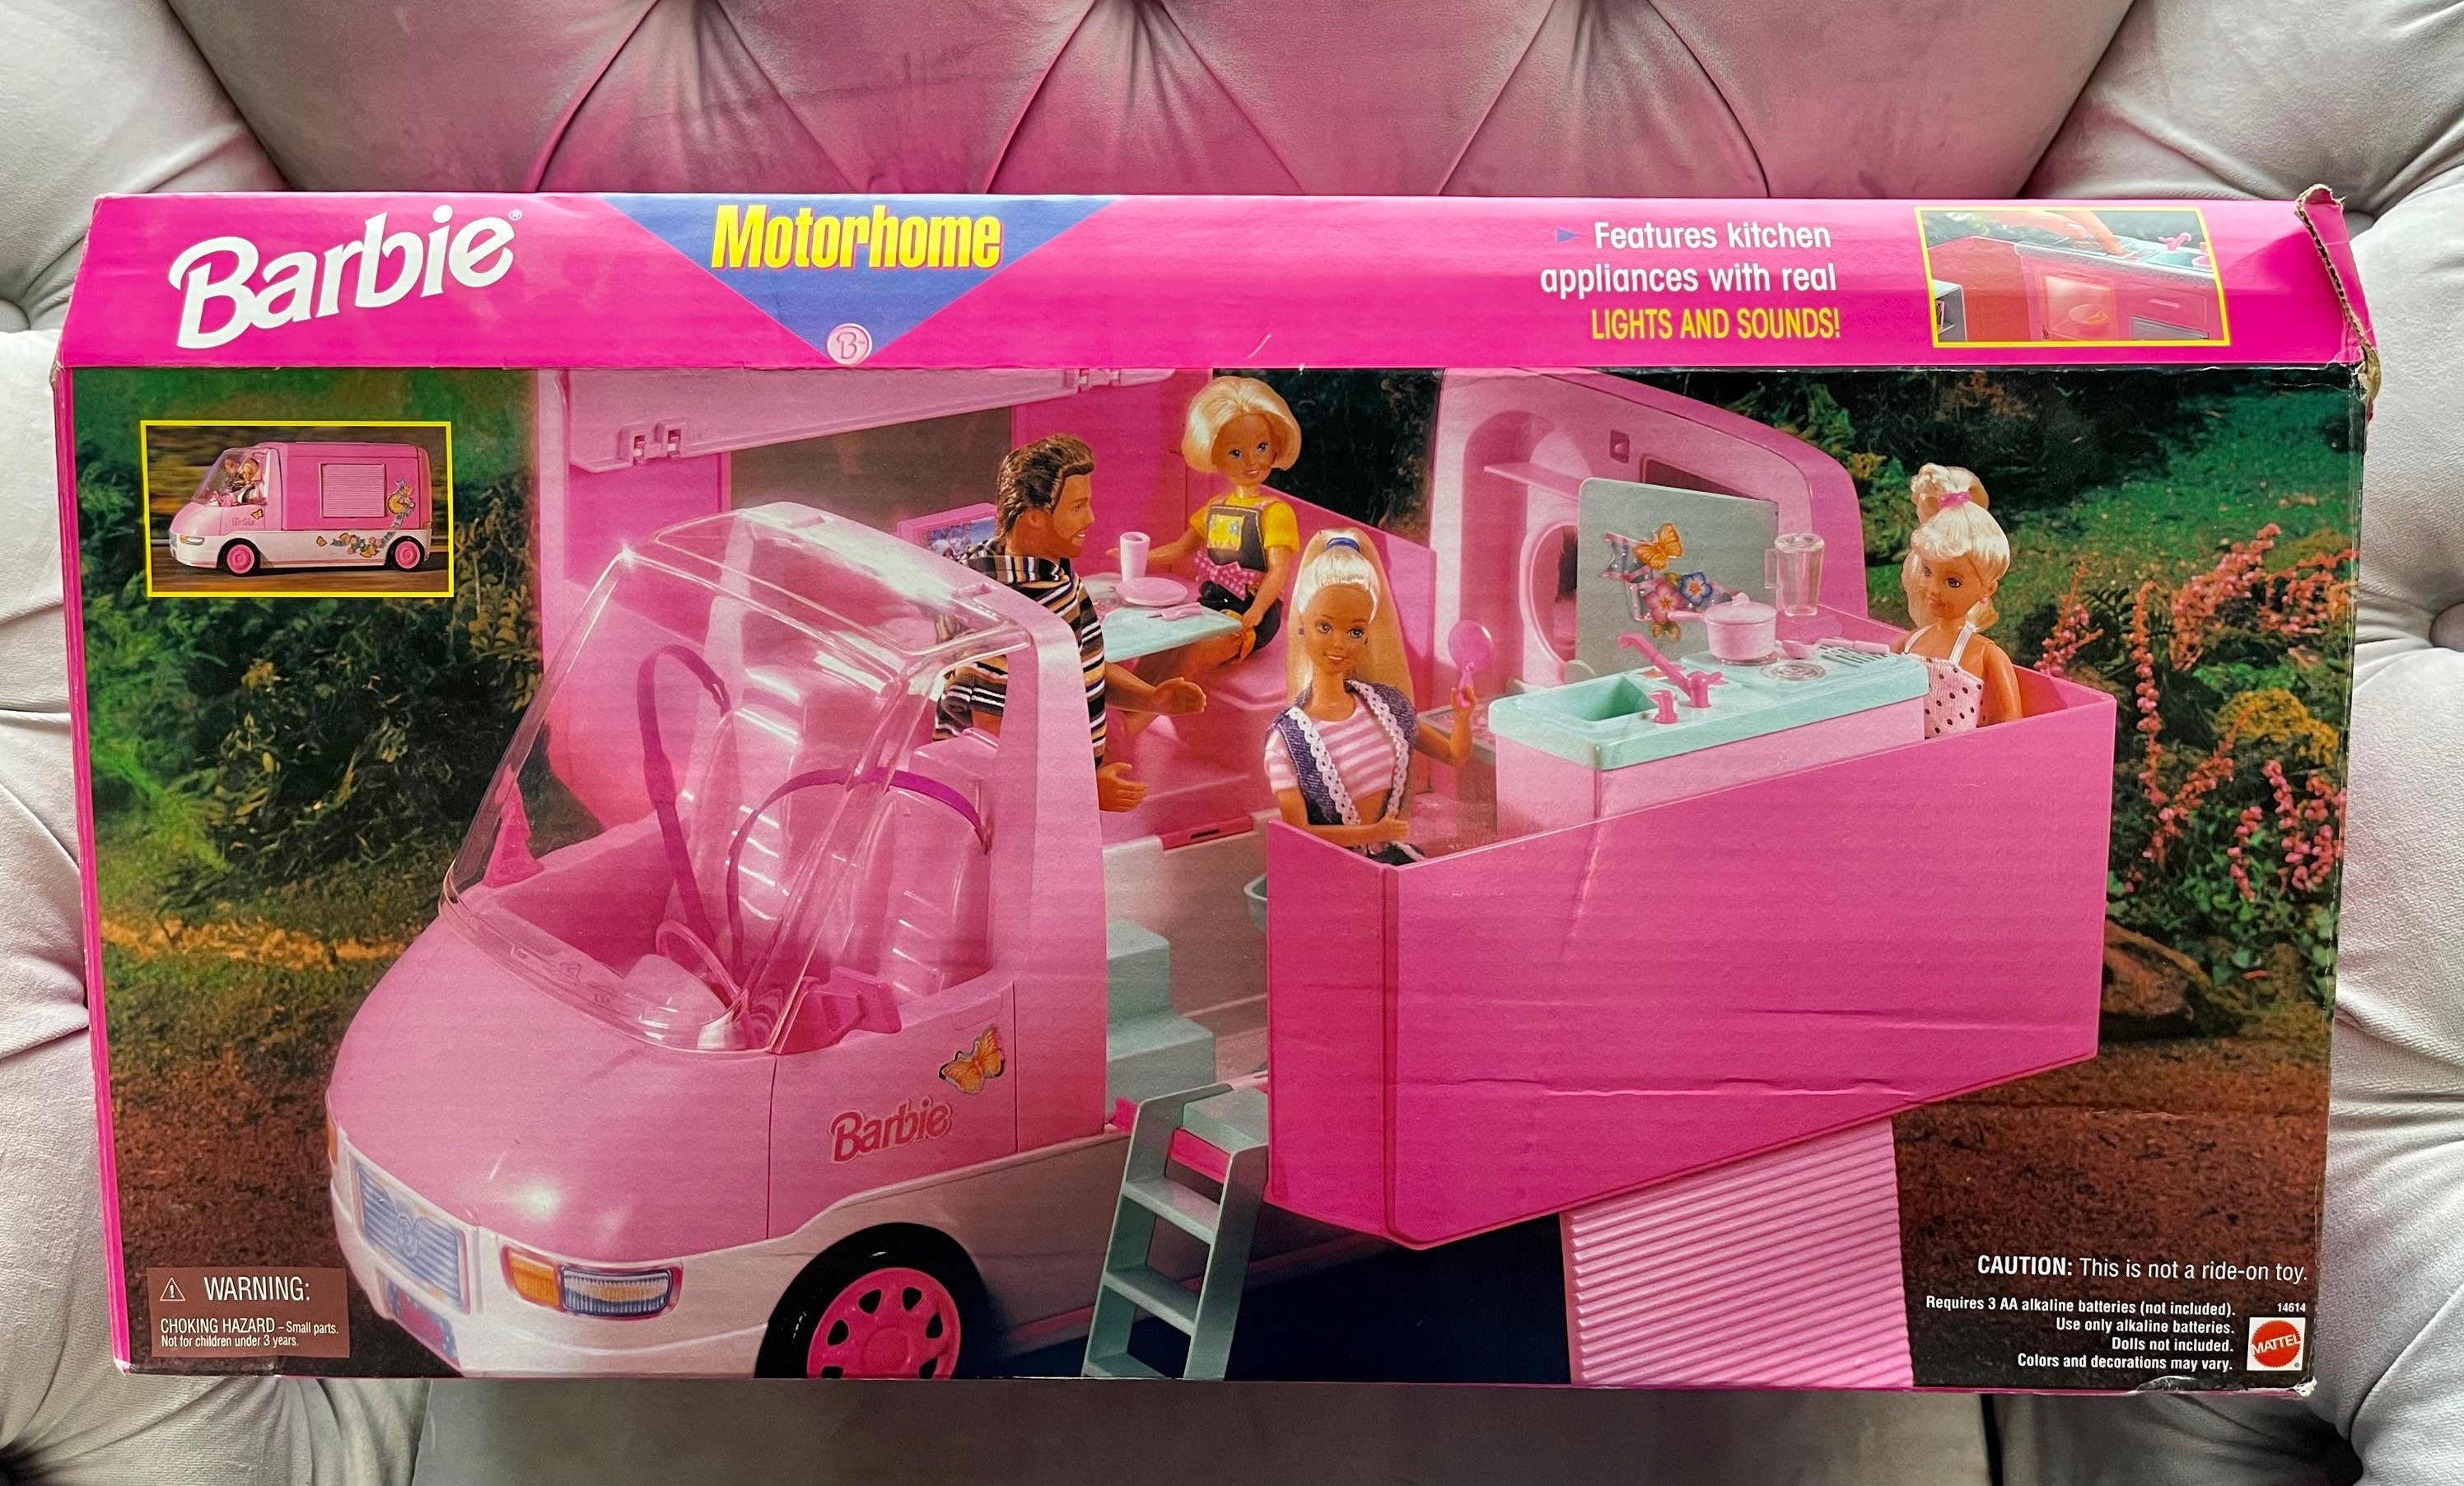 GMC Motorhome Collectables  Childhood toys, Barbie, Childhood